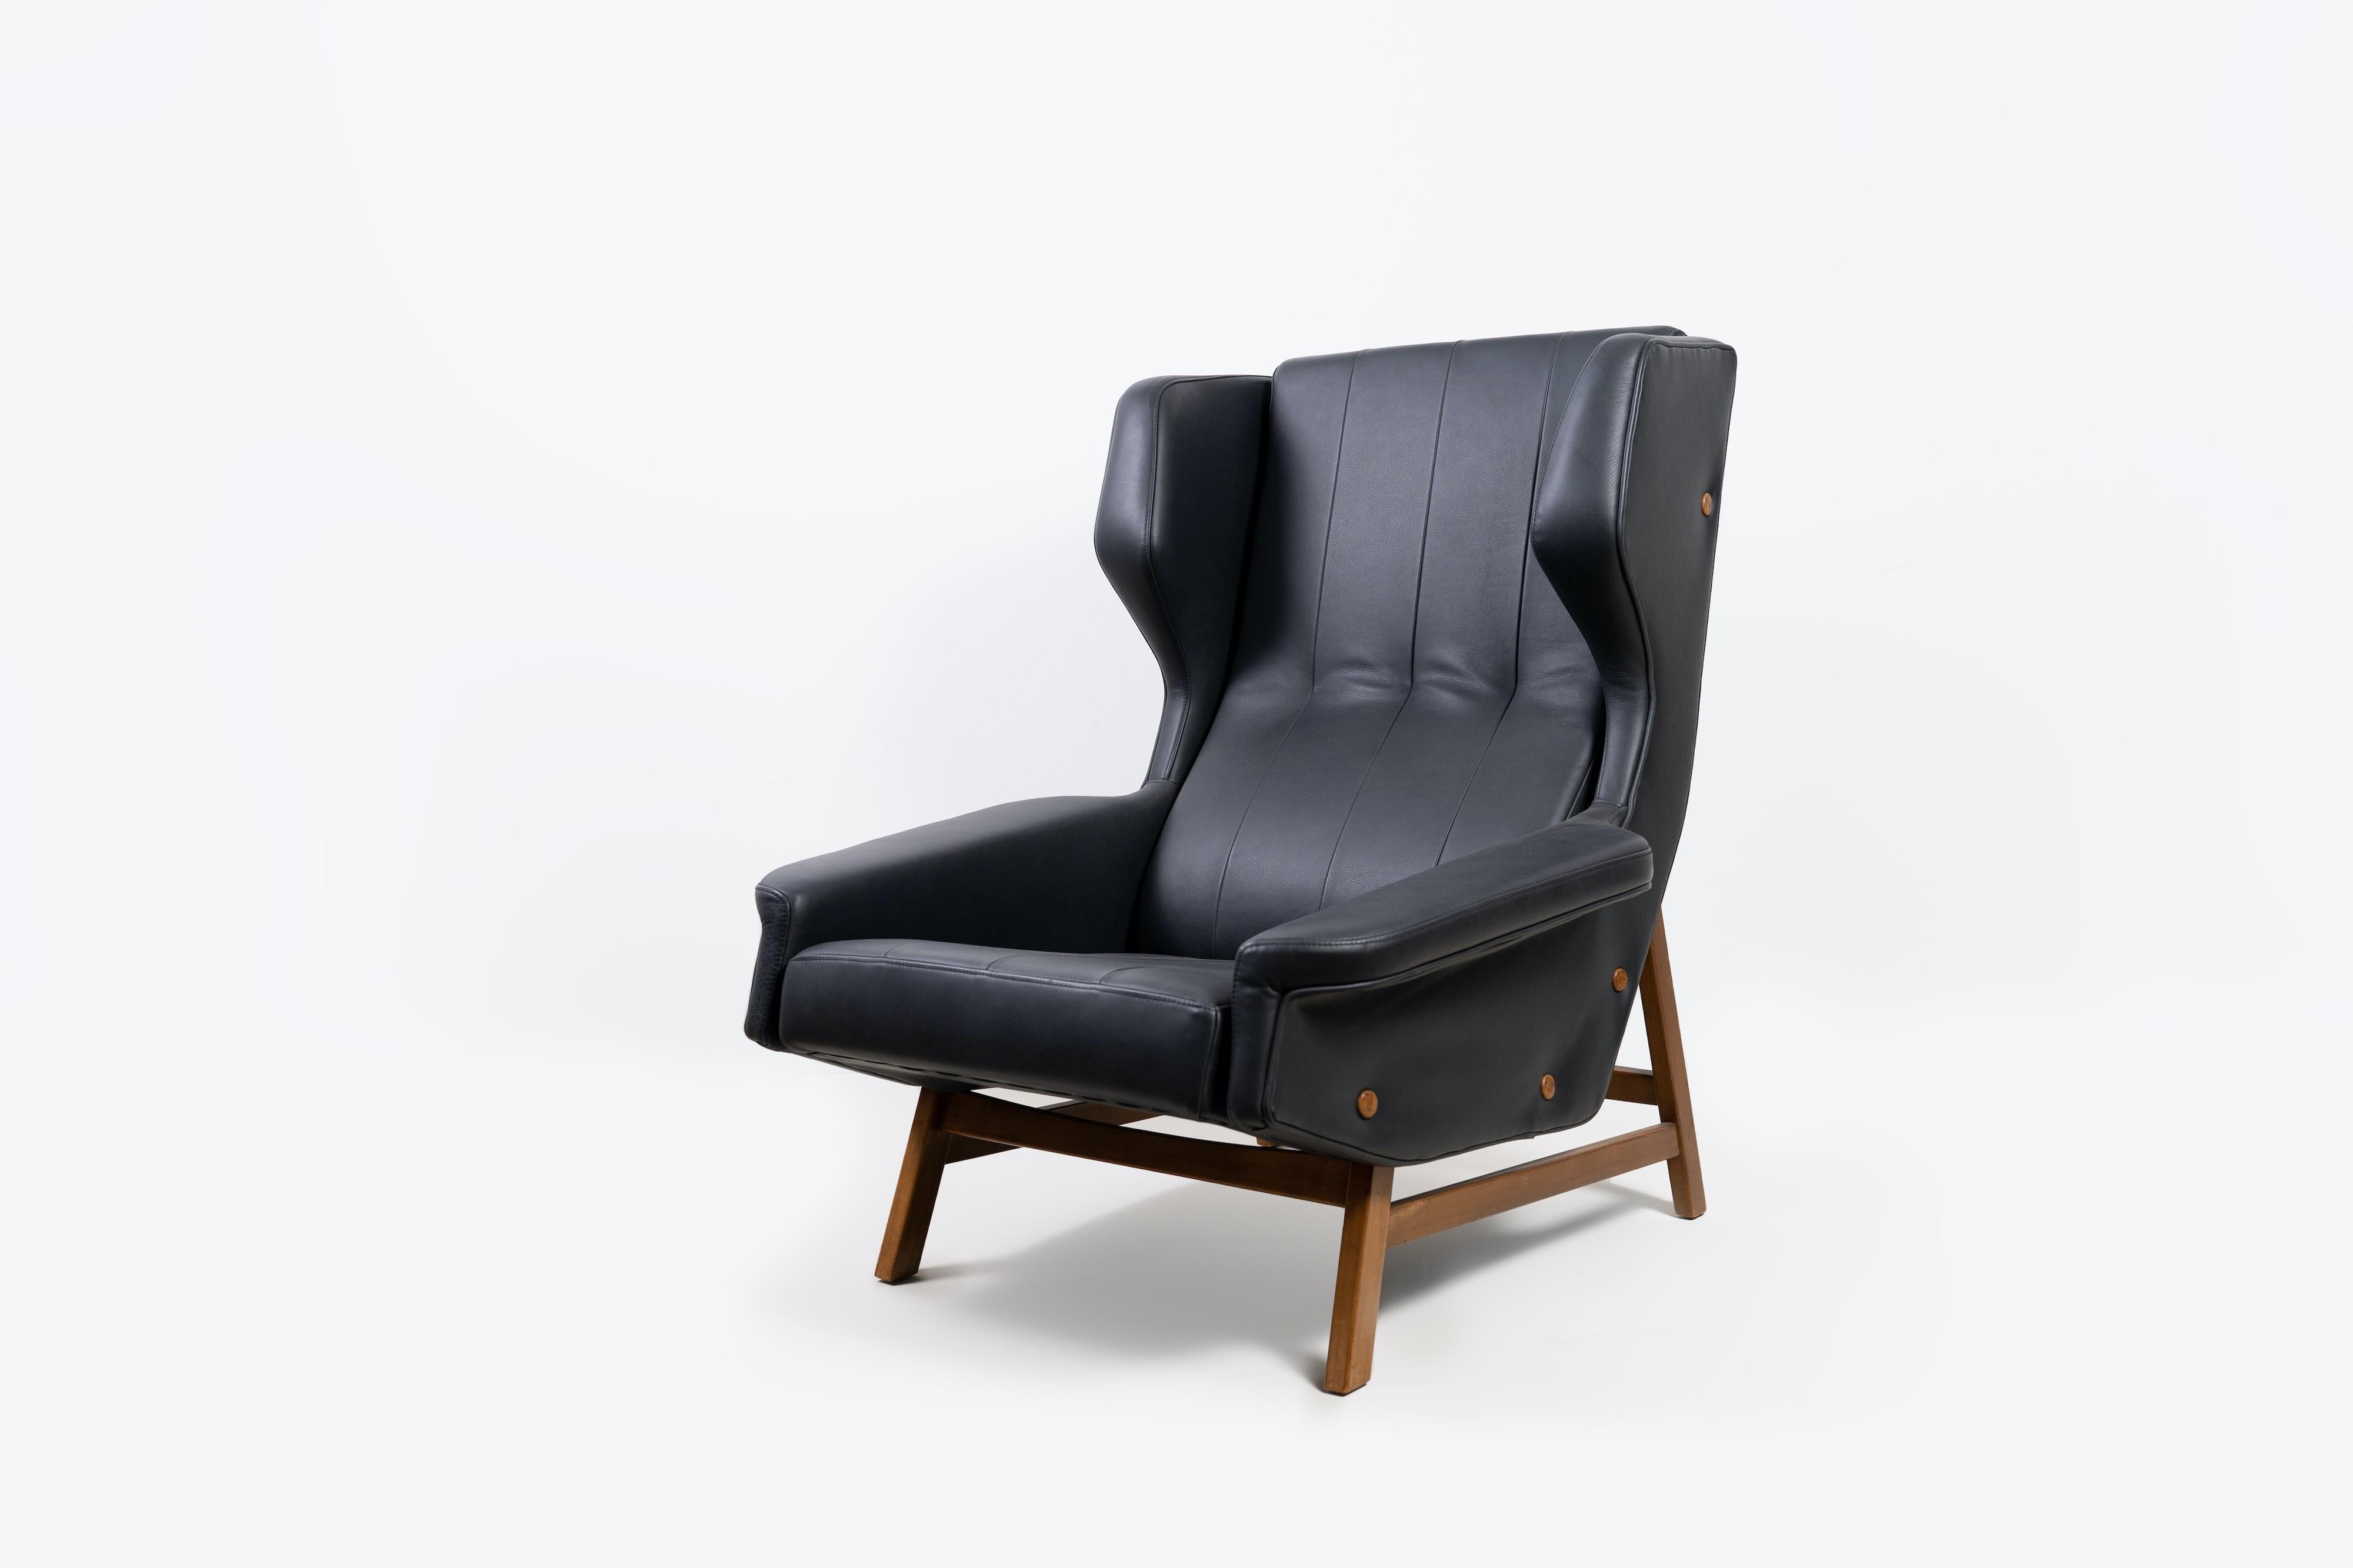 The 877 Wingback armchair is an absolute classic. Appreciated at large by the design world, this iconic armchair was designed in 1959 by Gianfranco Frattini. The chair offers both the highest quality of construction and materials as well as the most